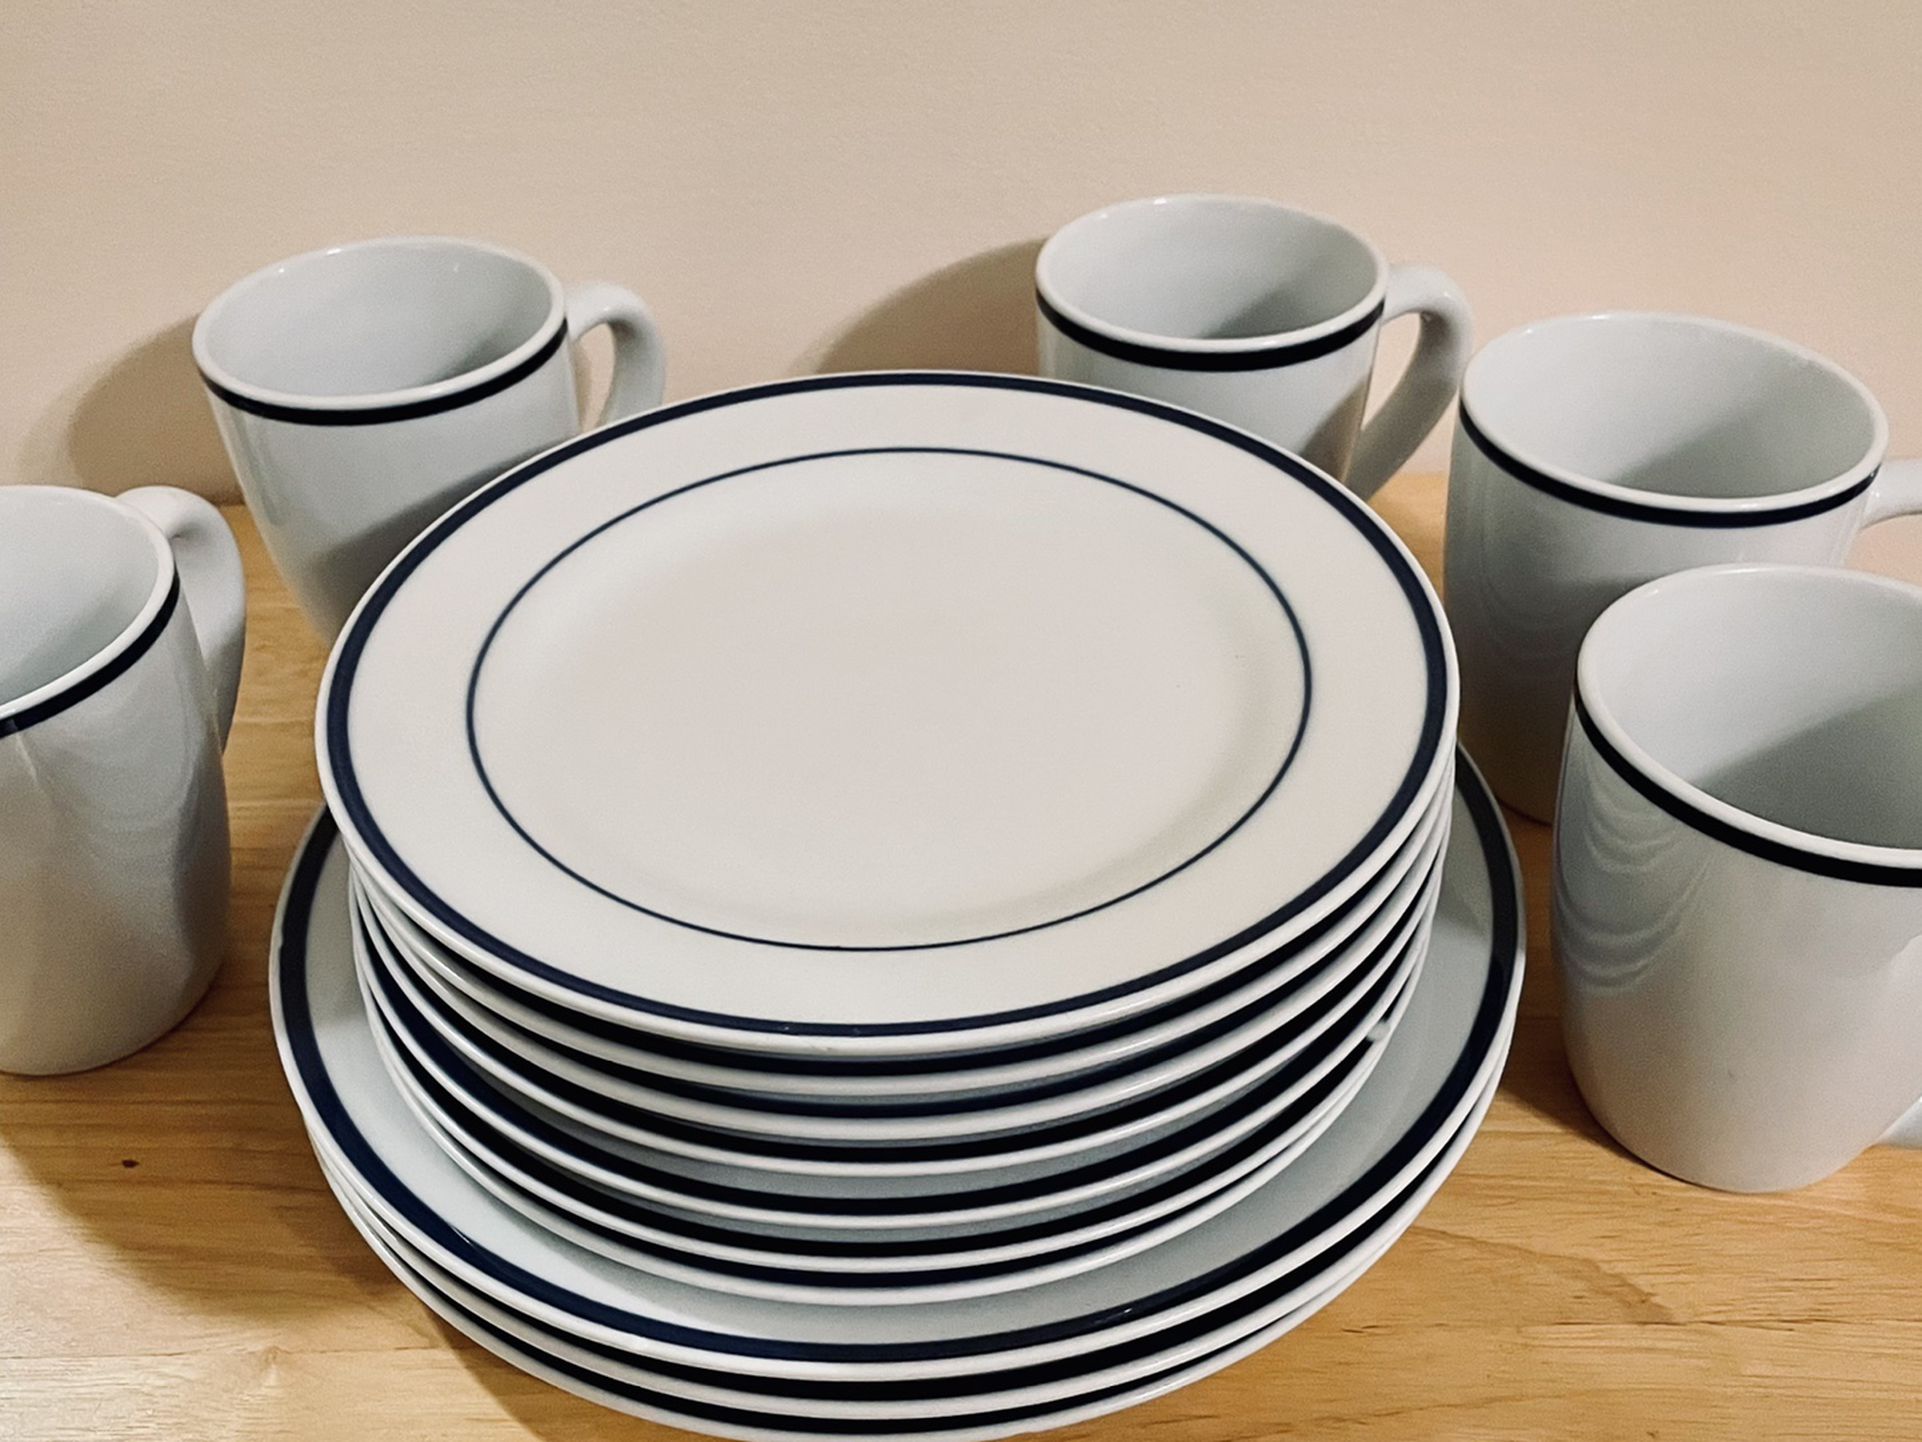 Dishware By Oneida ‘Matre d’ Collection